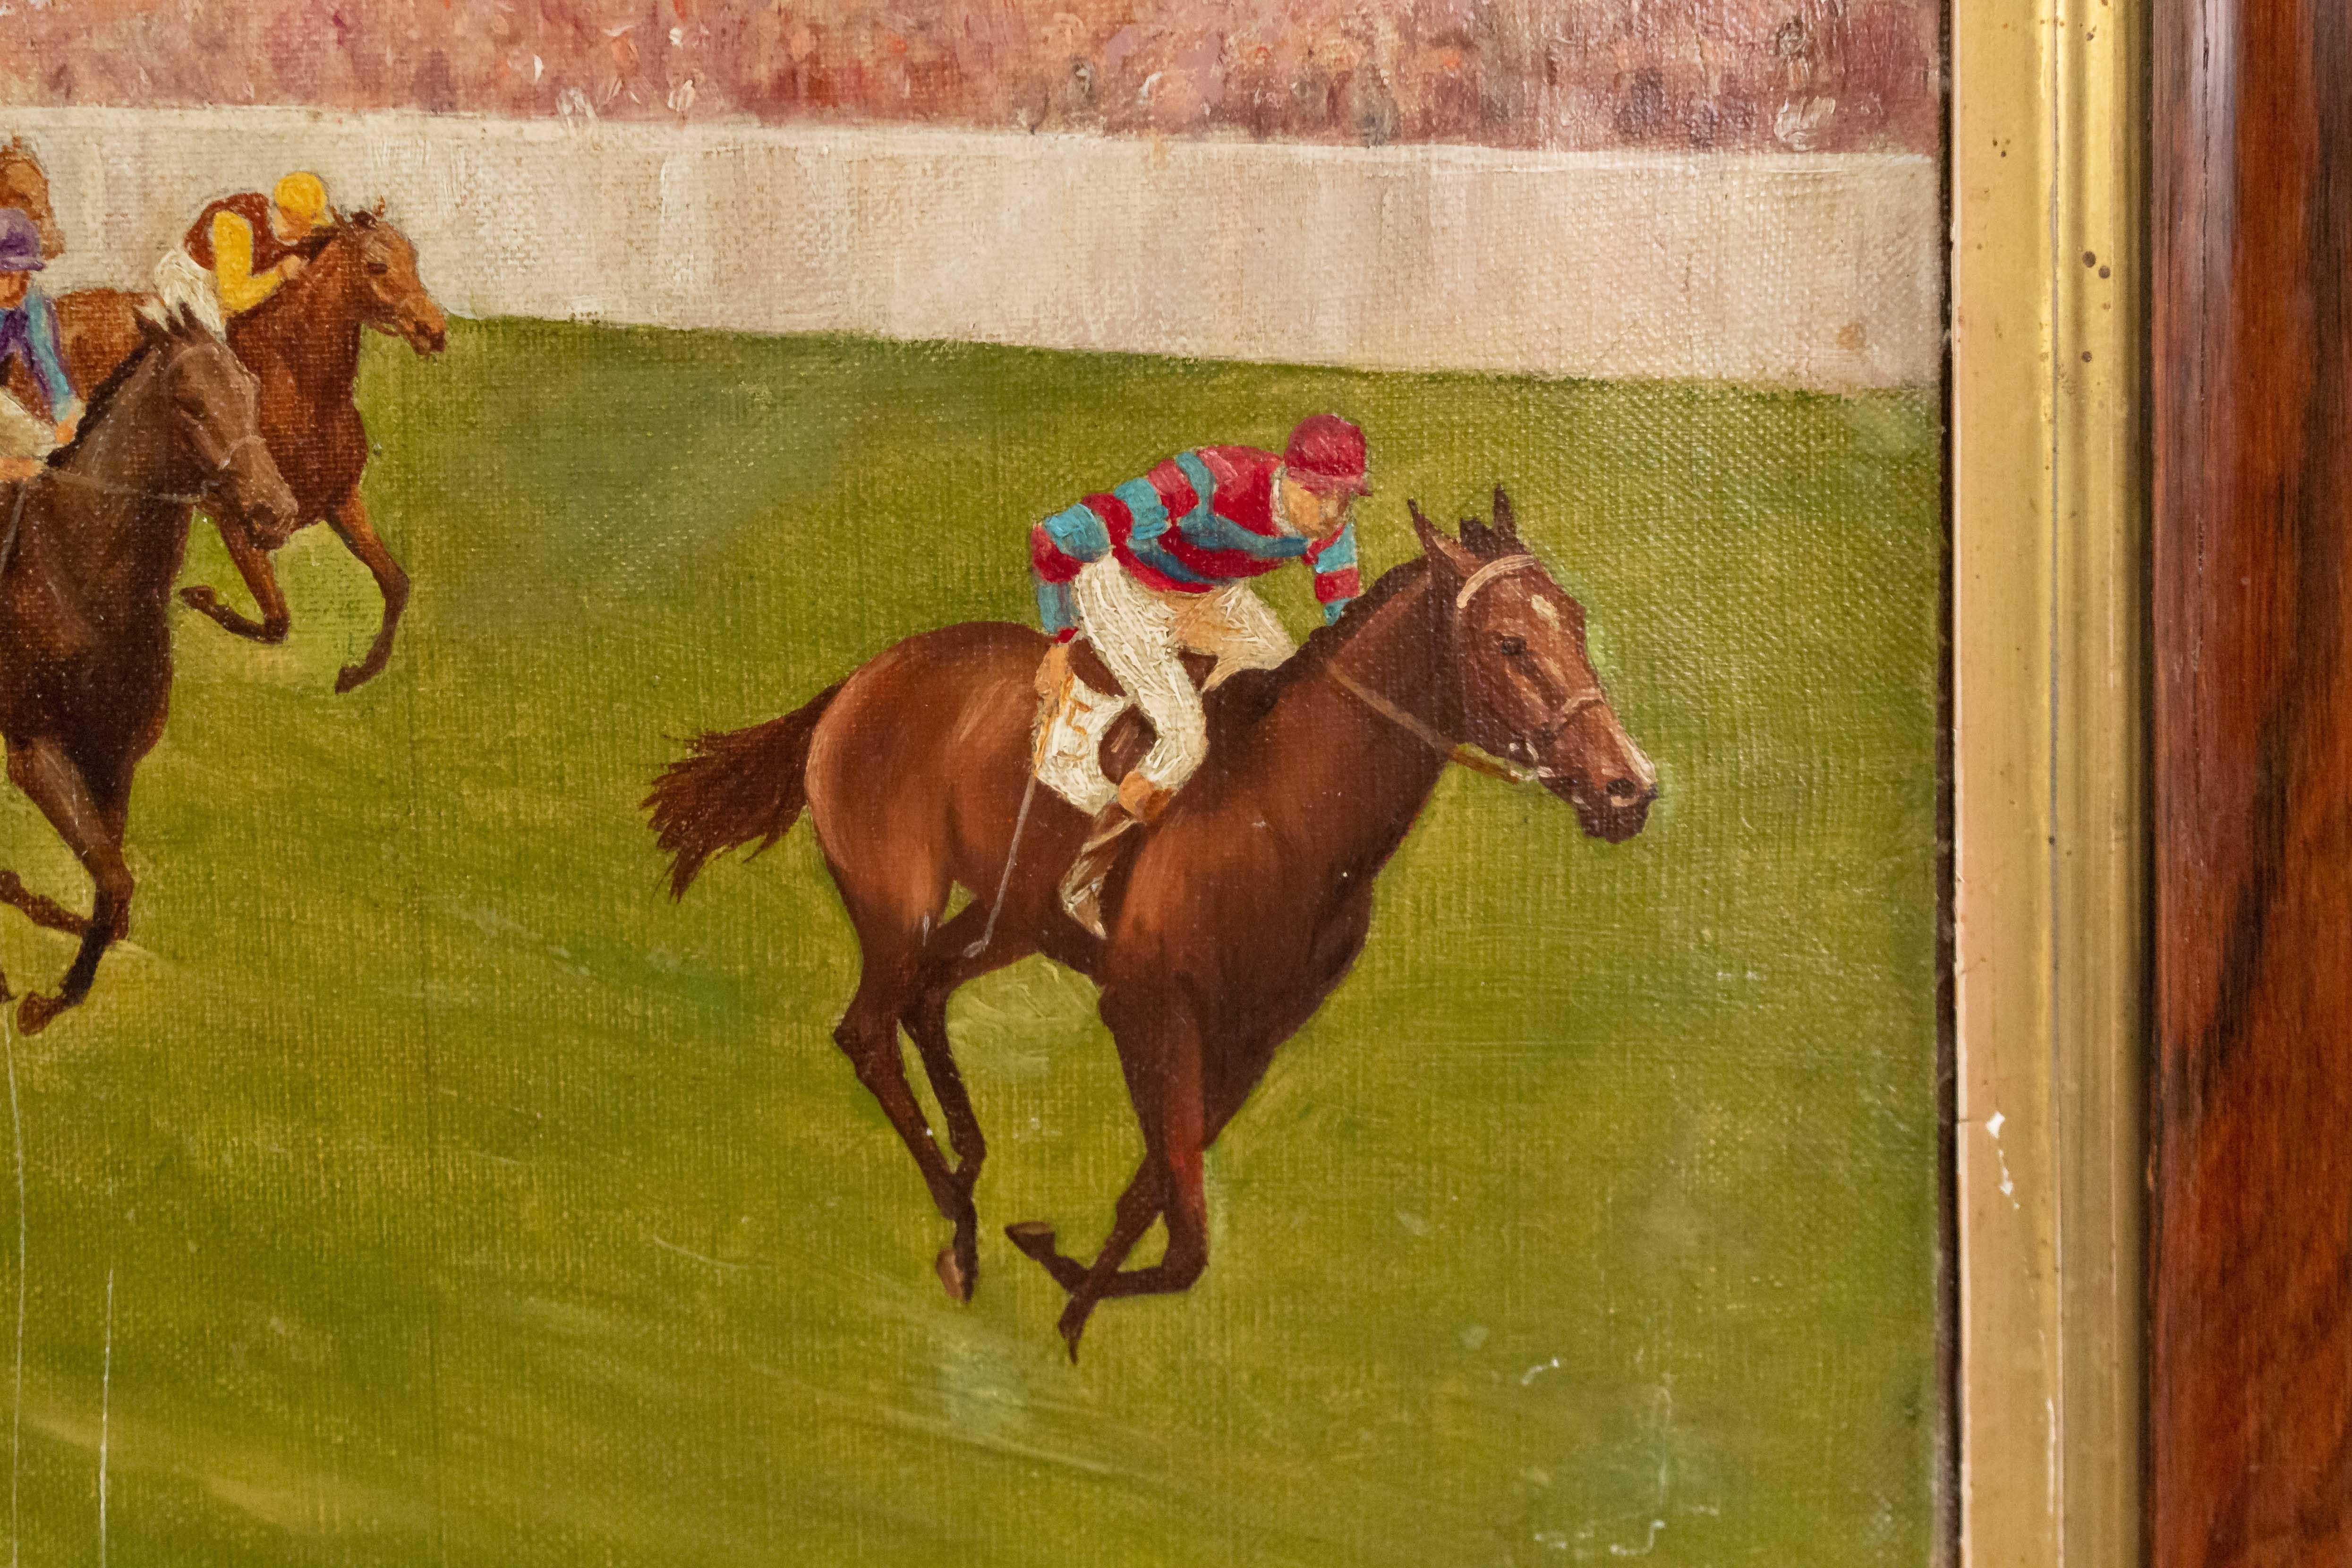 English Art Moderne oil painting of Stewart's cup horse race in rosewood frame. Signed lower left: 